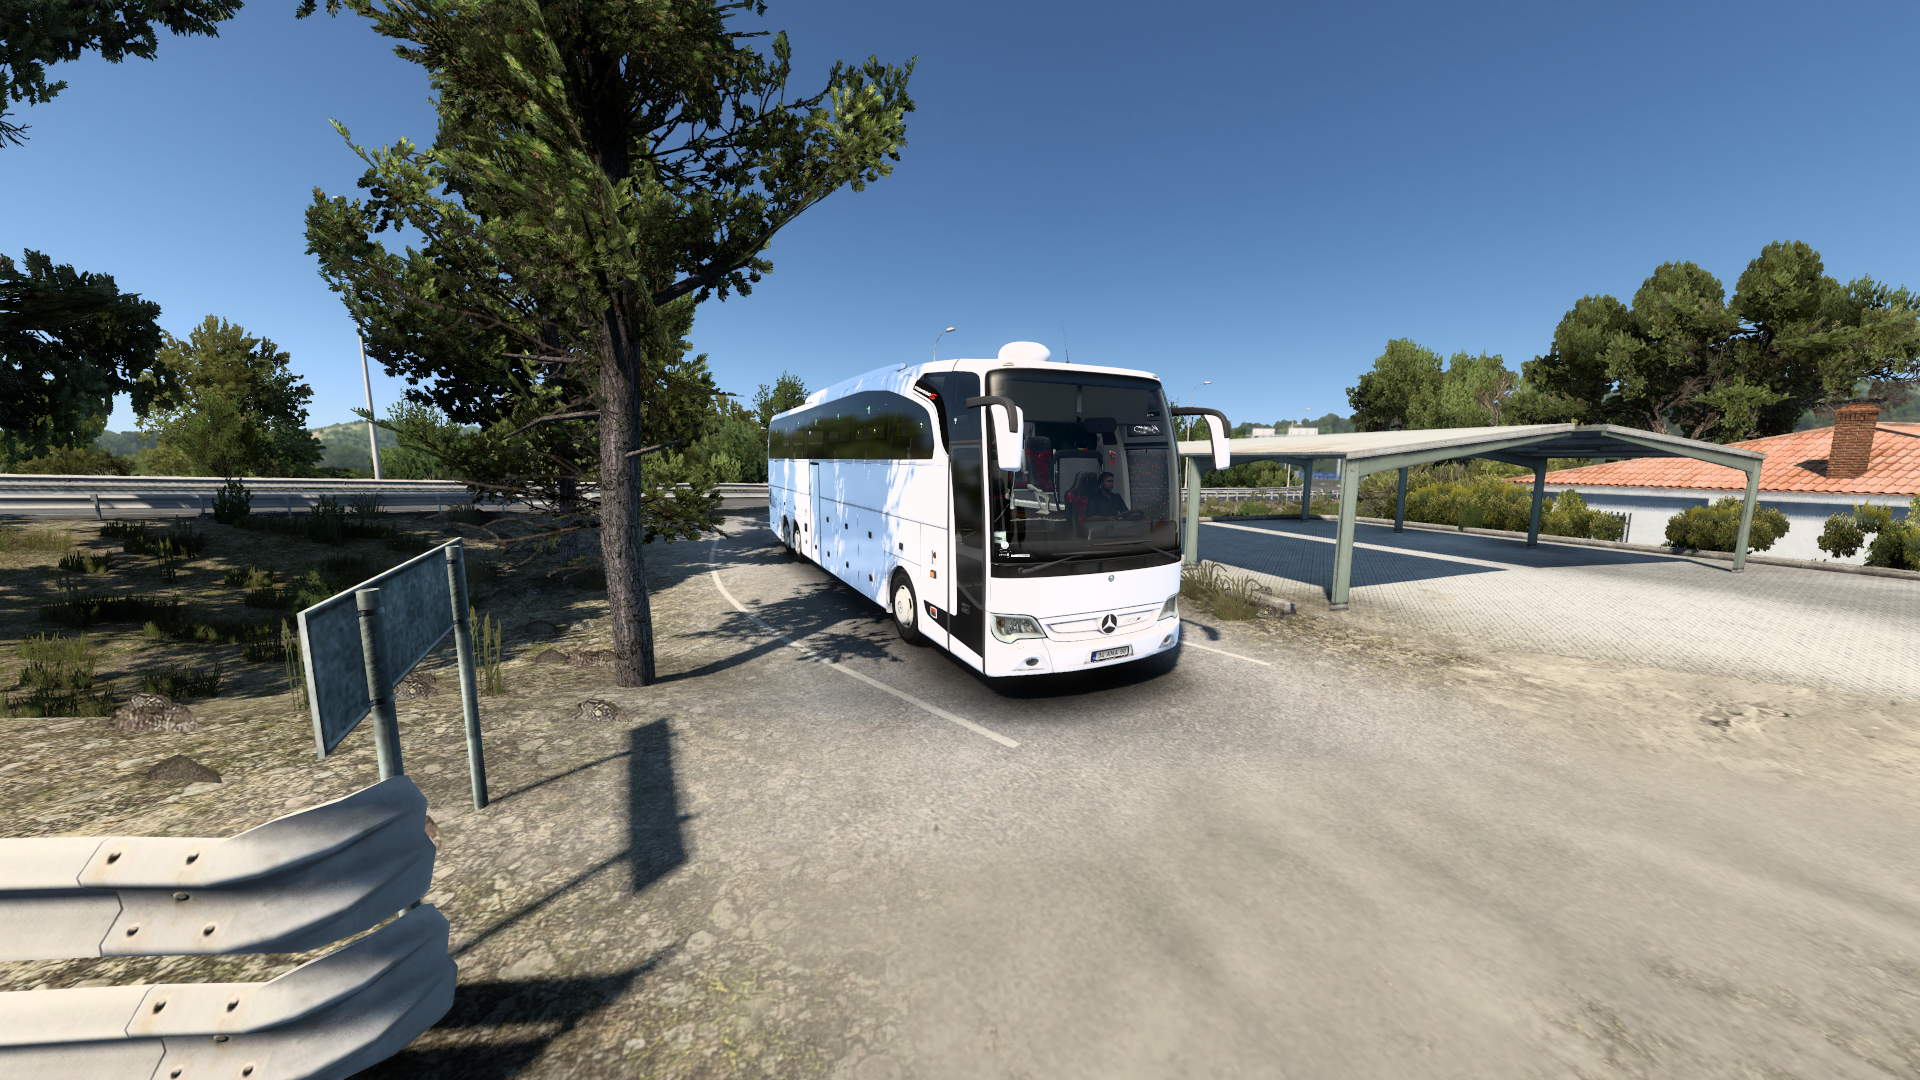 ets2_20220615_233605_00.png